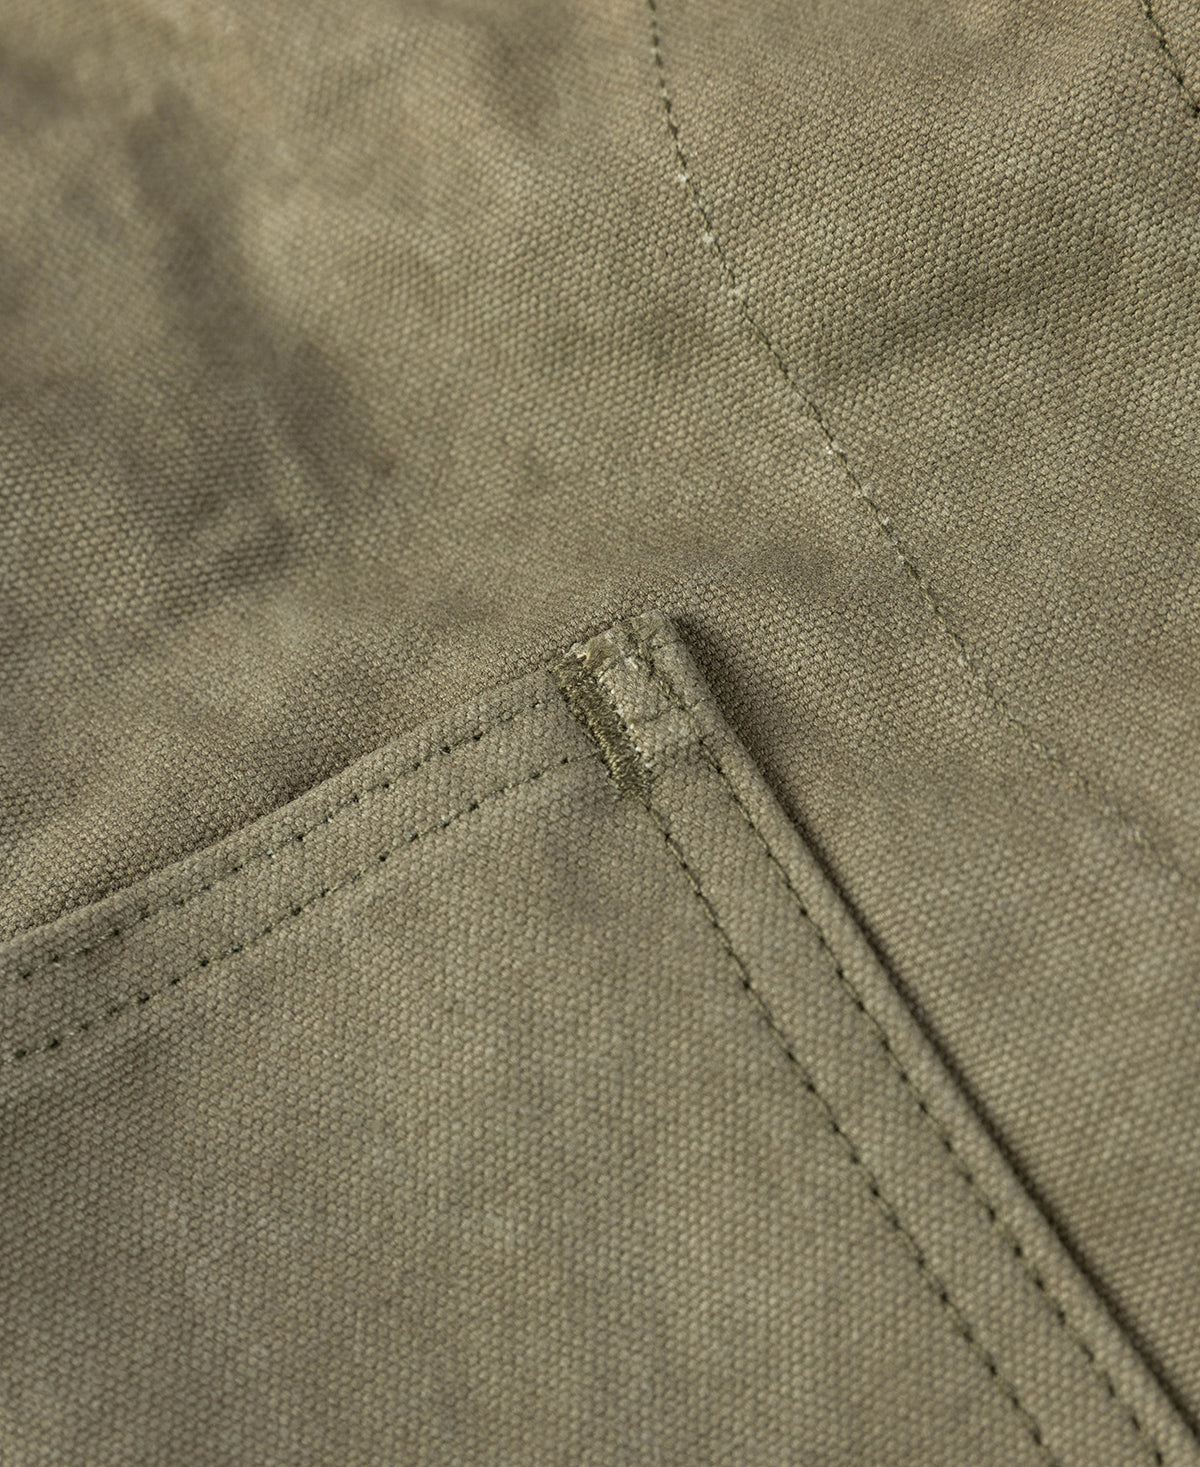 1930s Heavyweight Canvas Game Pocket Hunting Vest - Olive